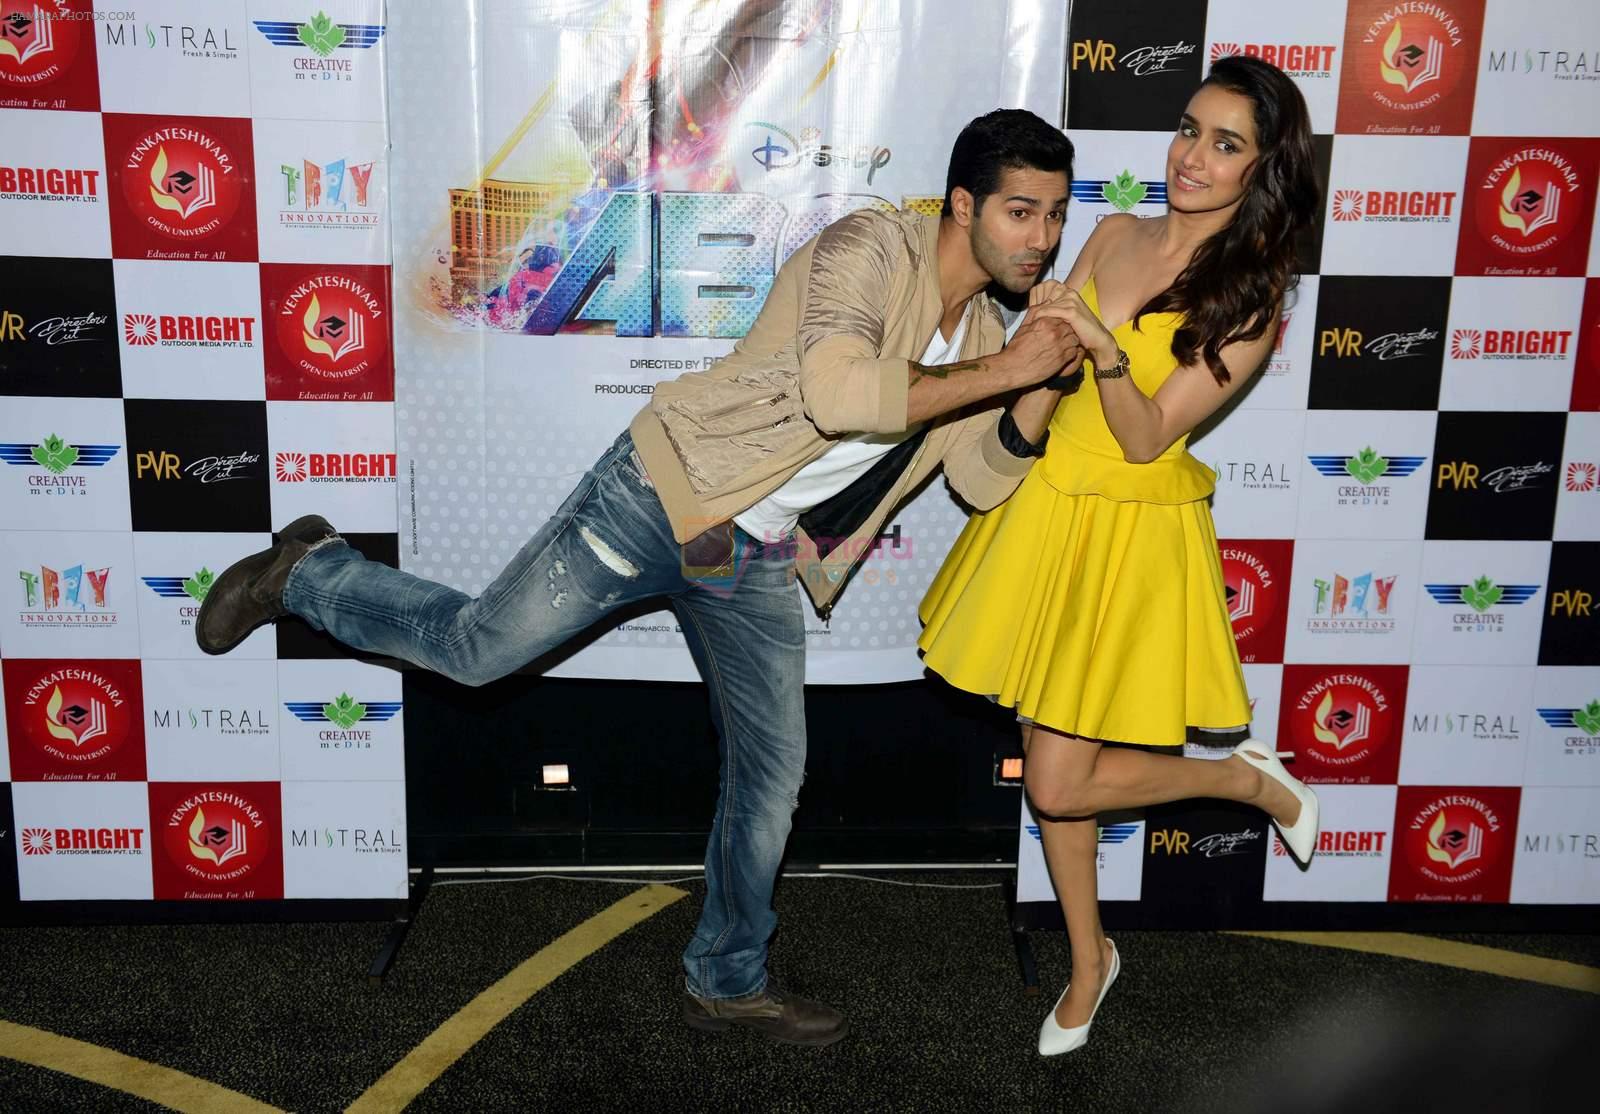 Varun Dhawan and Shraddha Kapoor in Gurgaon for ABCD2 on 16th June 2015